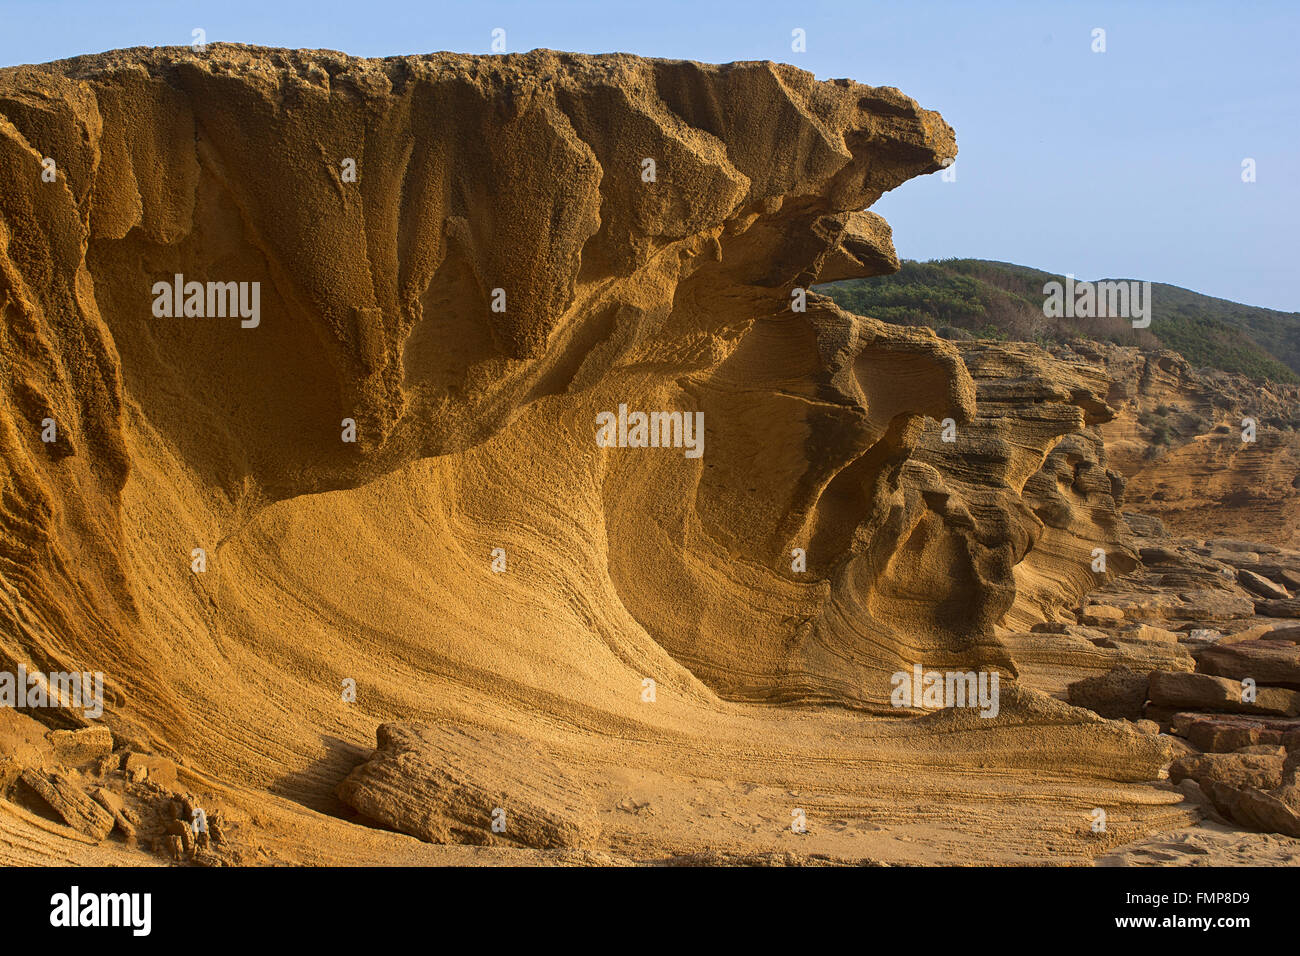 Washed out rock face, rock formation on the beach of Portu Maga, Costa Verde, Sardinia, Italy Stock Photo